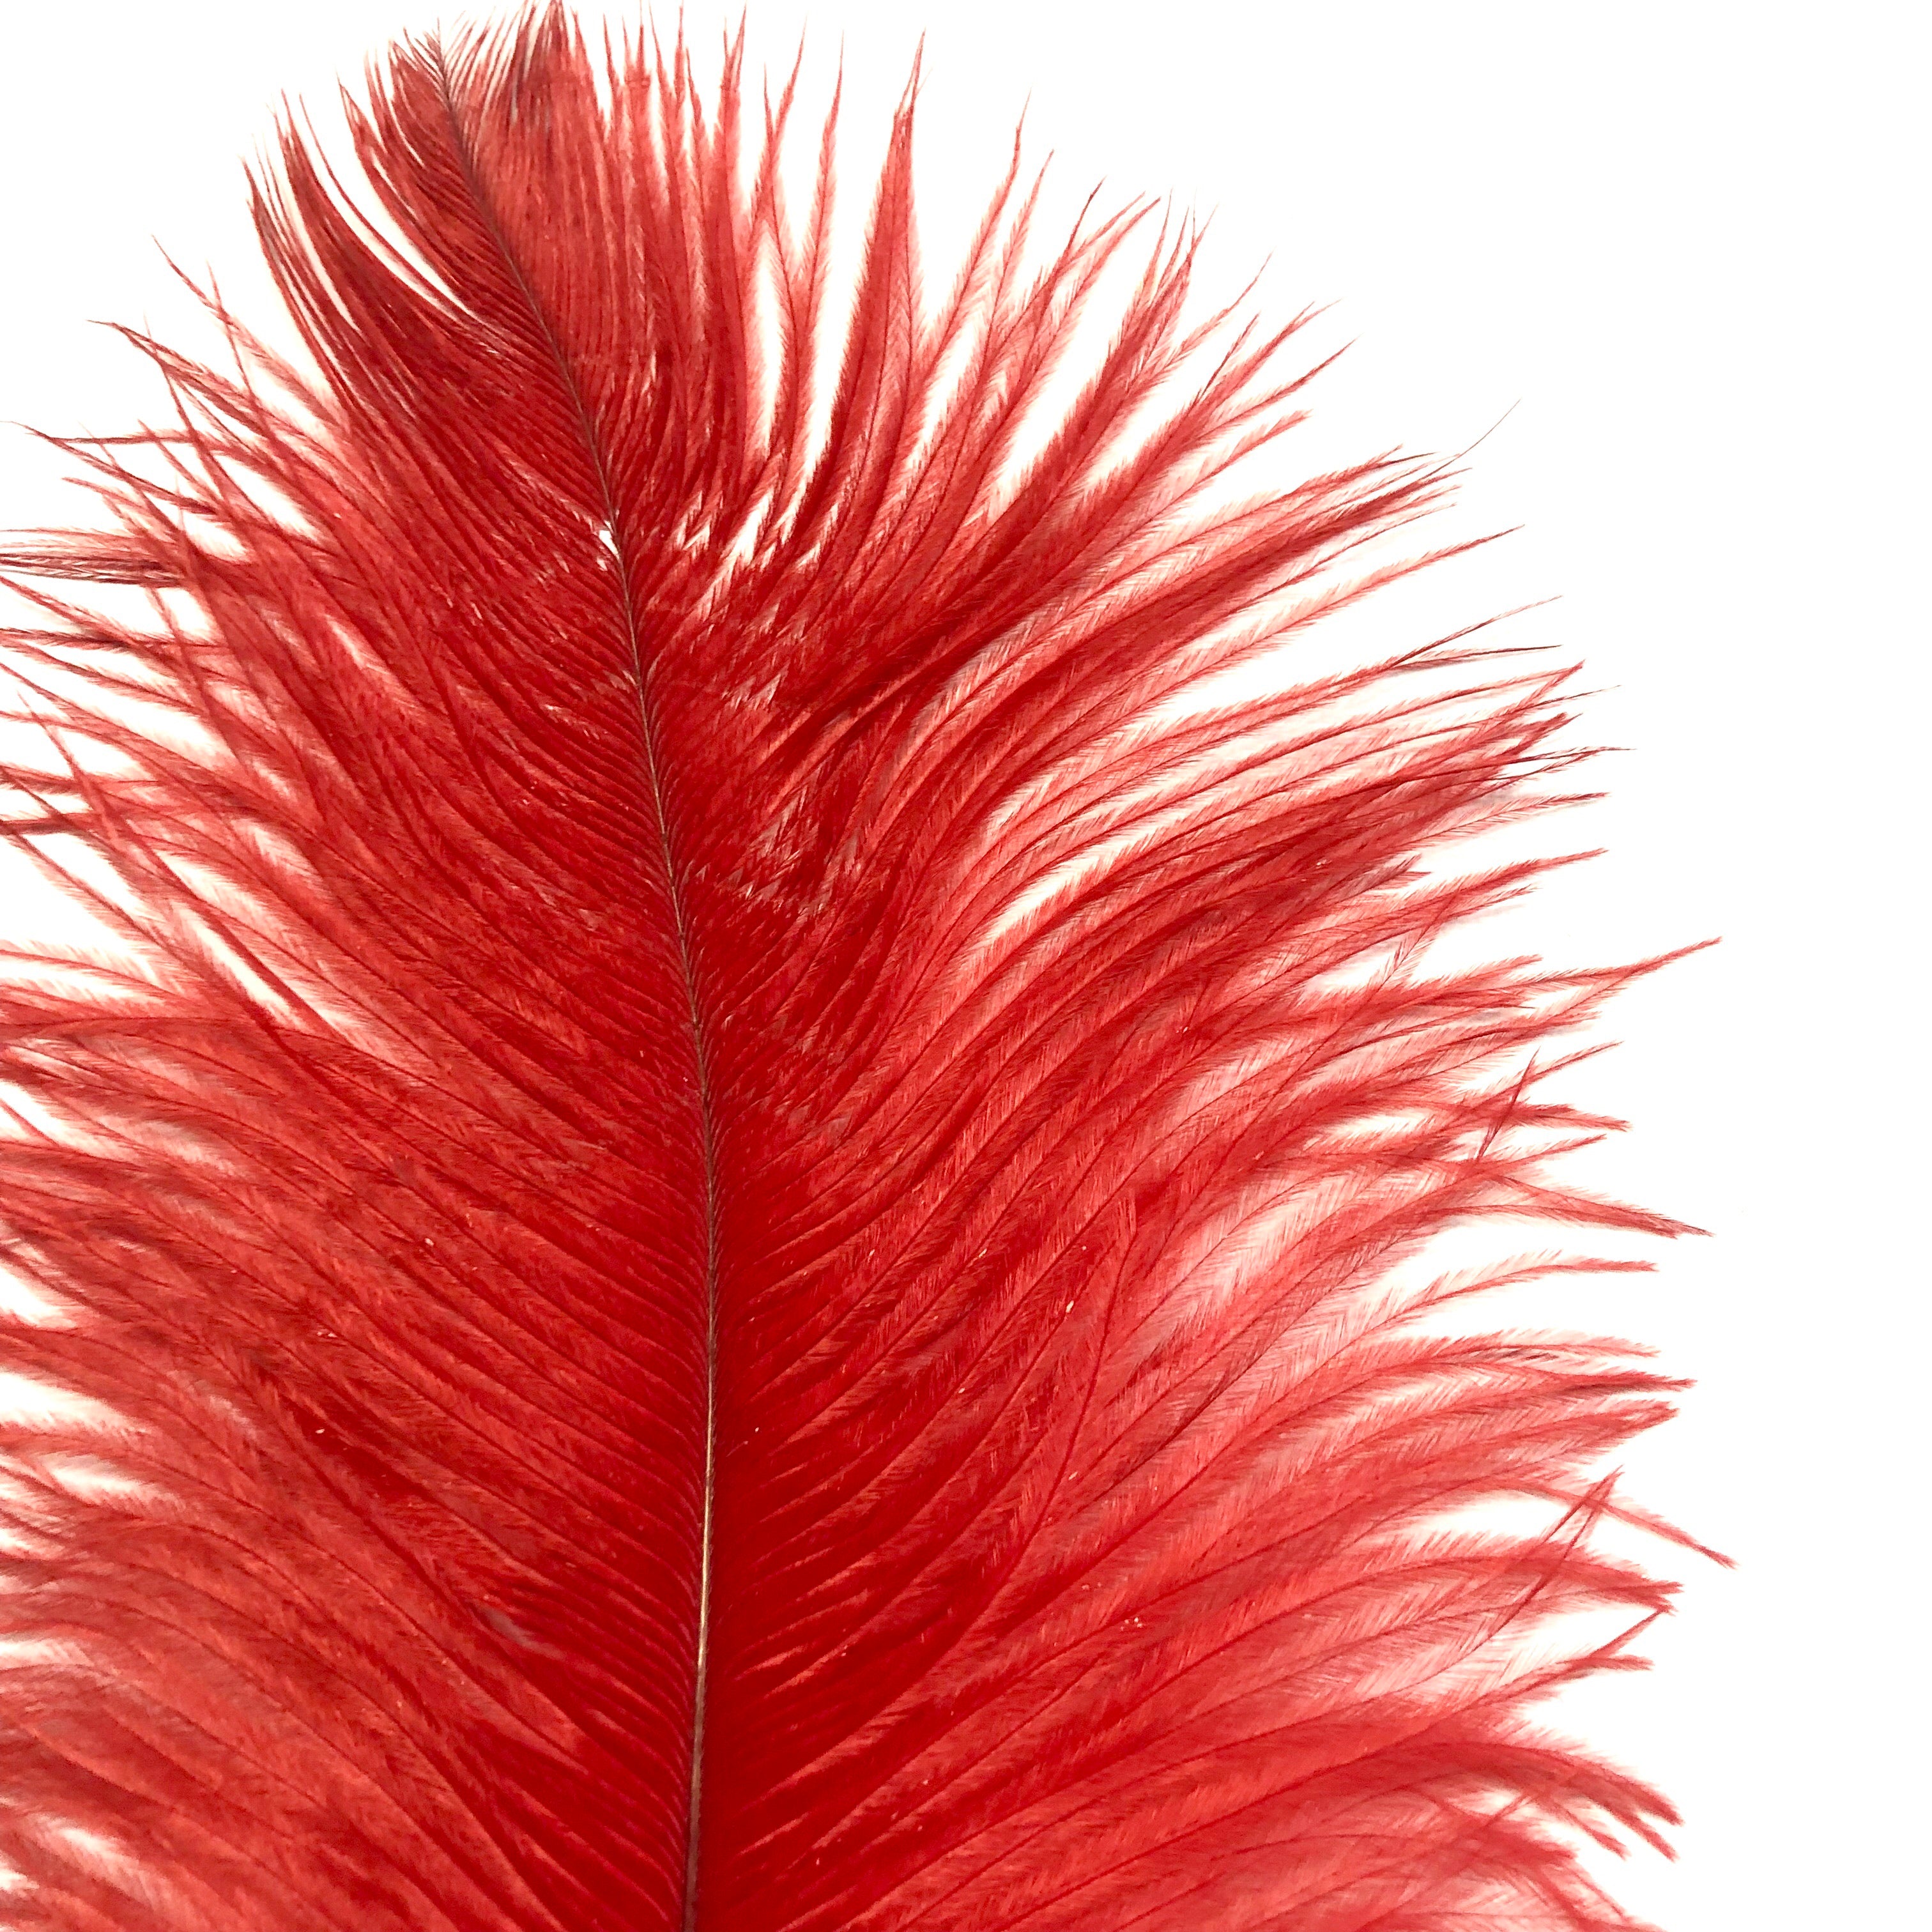 Ostrich Feather Drab 37-42cm x 5 pcs - Red ((SECONDS))